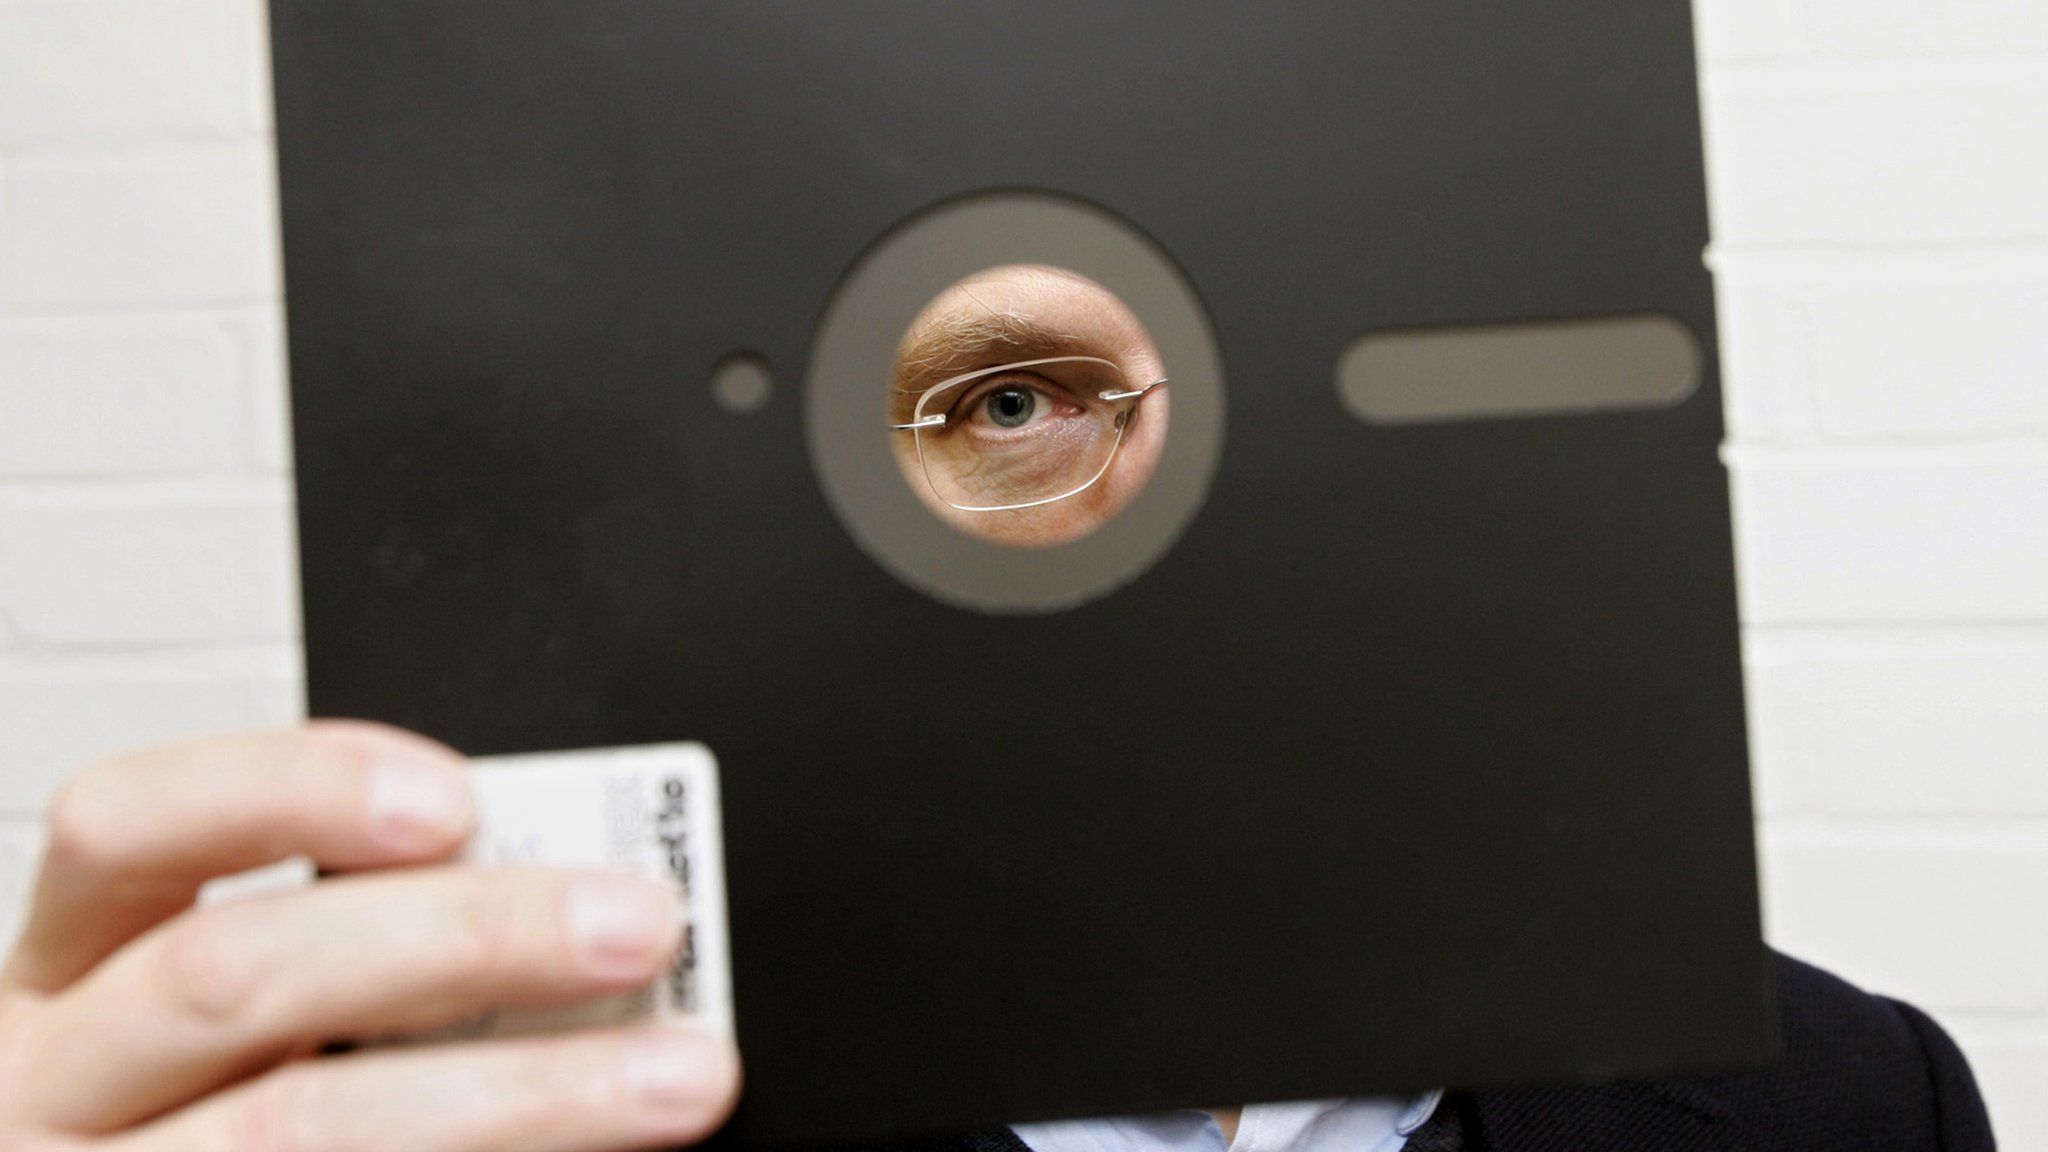 File image of an 8in floppy disk